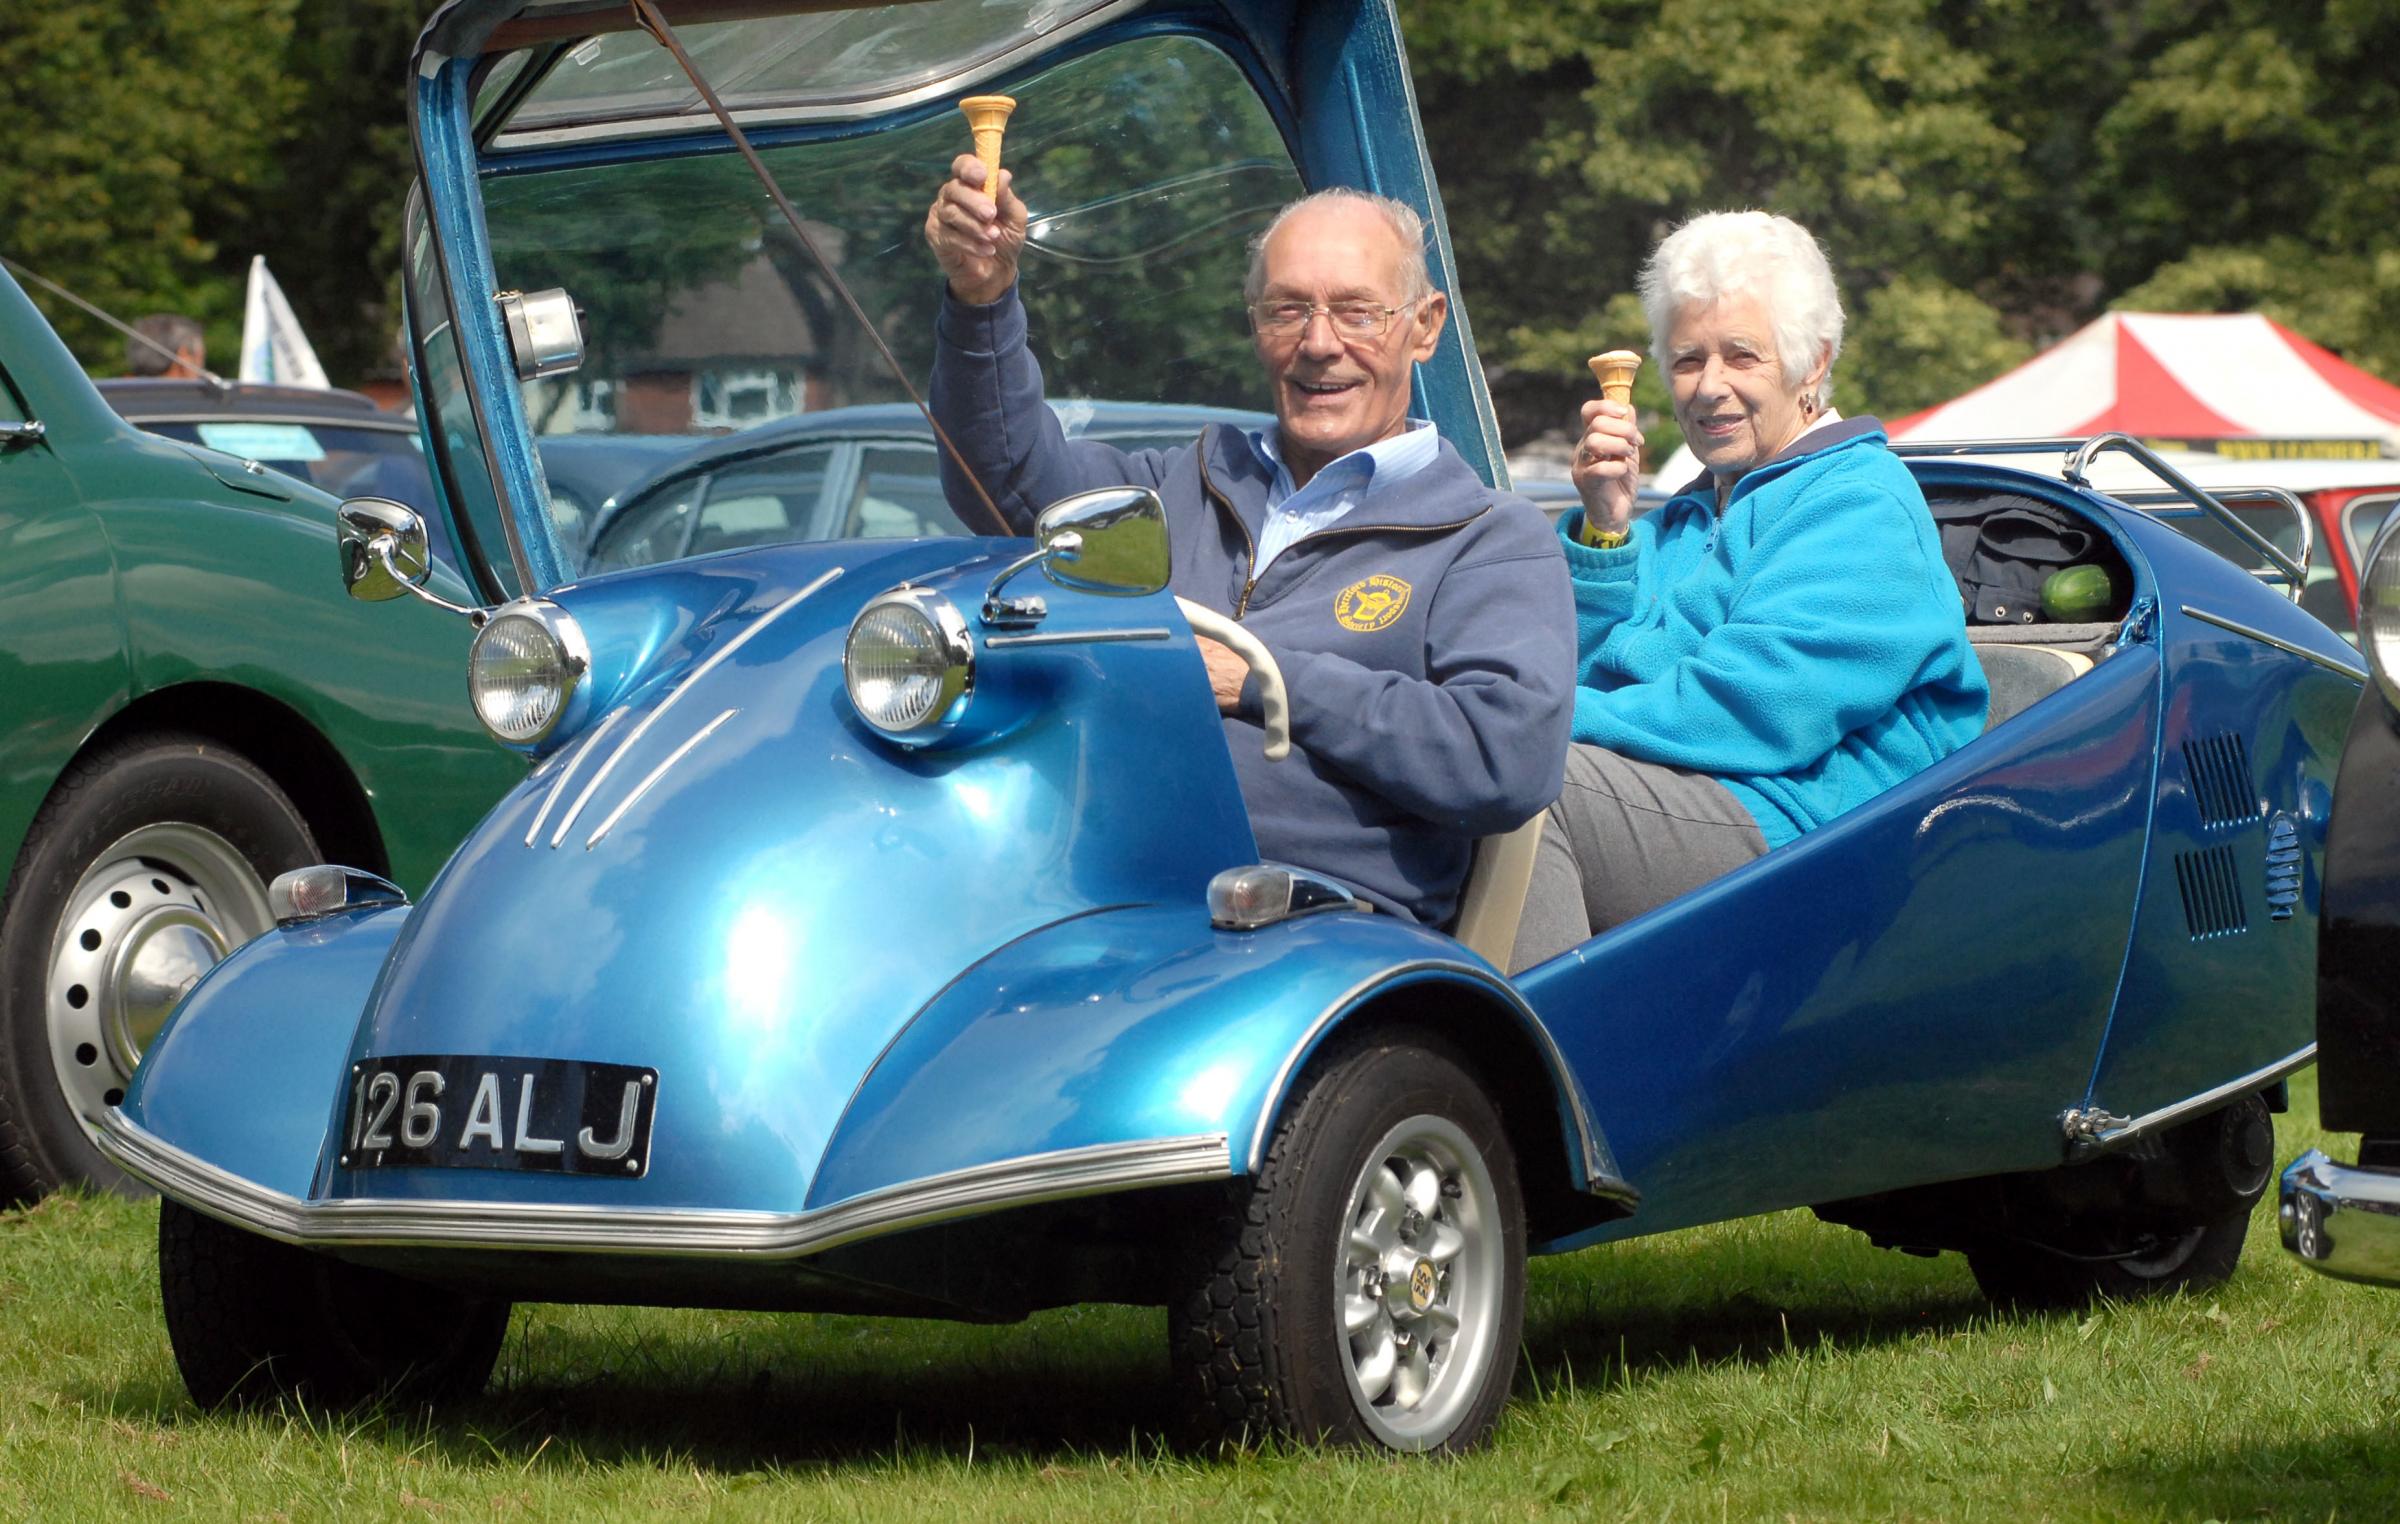 The Kington Vintage Rally returns to town this weekend